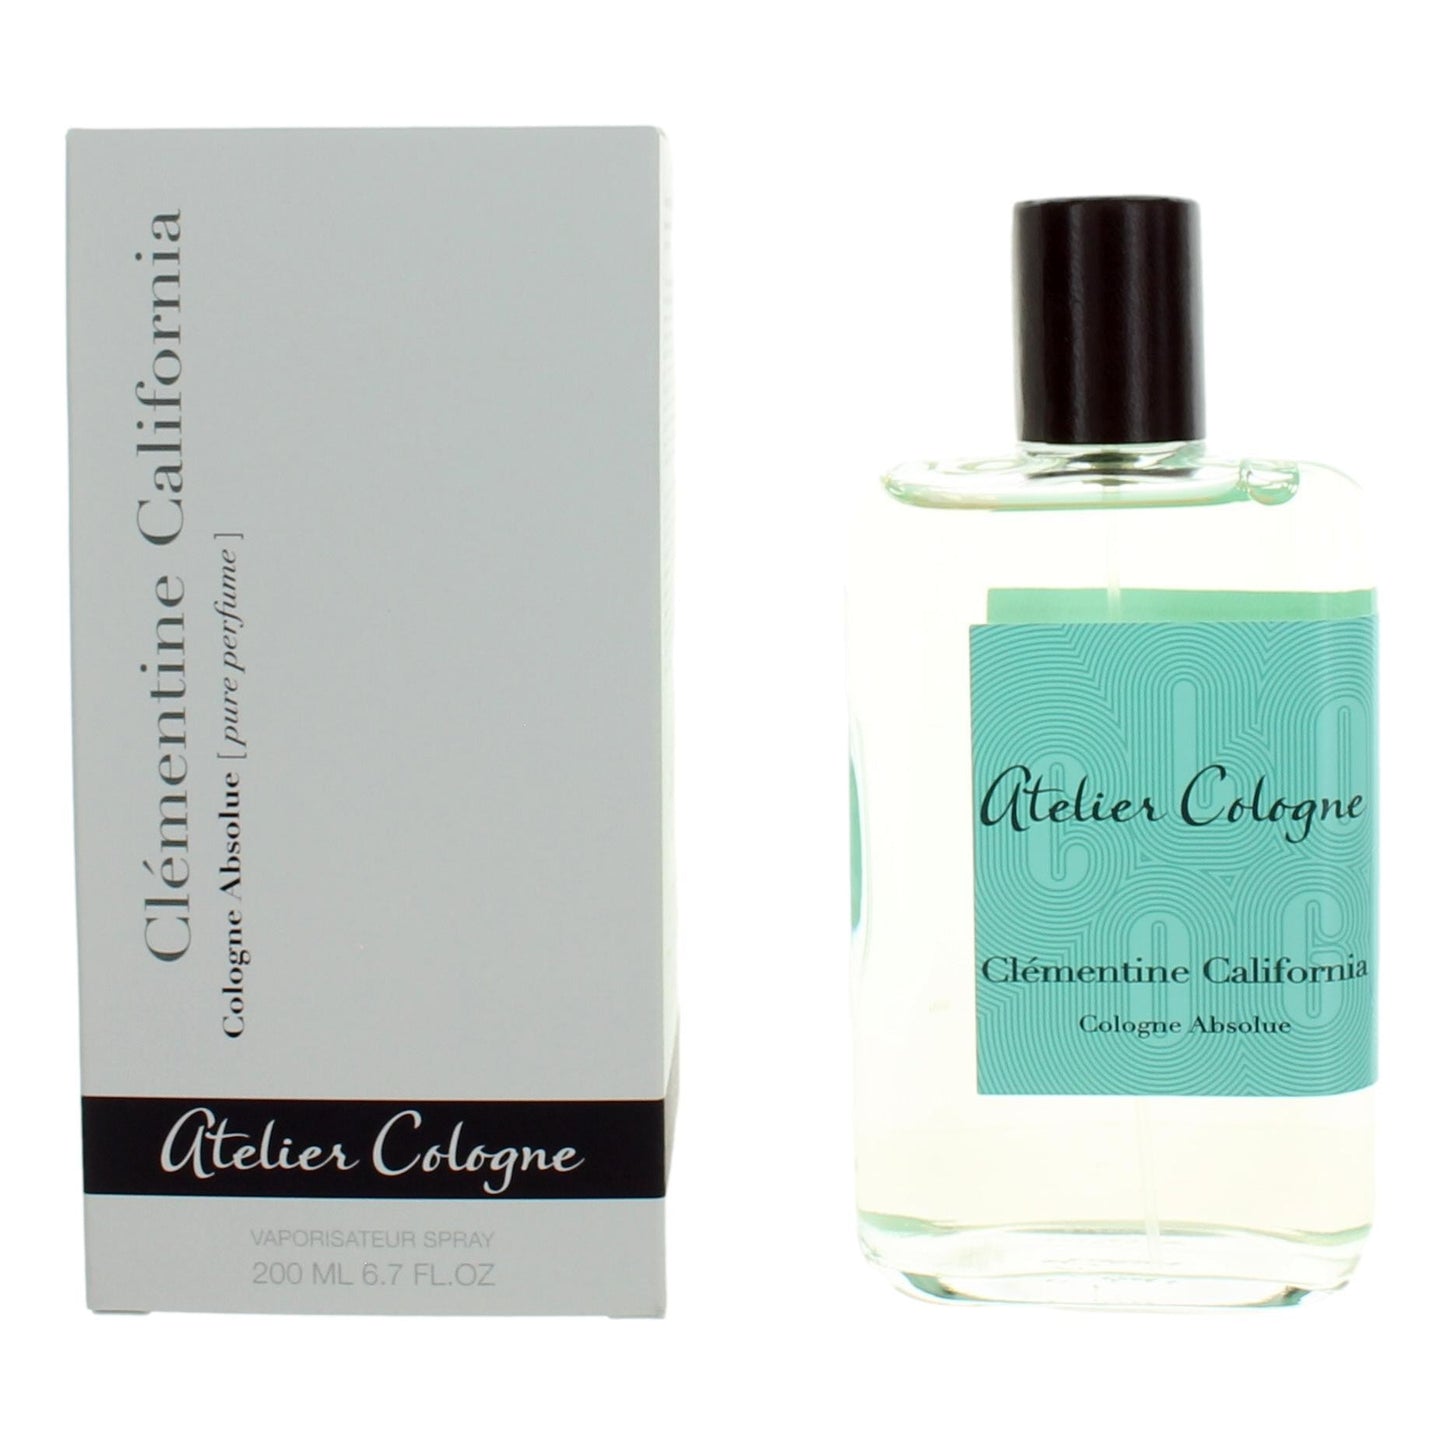 Clementine California by Atelier Cologne, 6.7oz Cologne Absolue Spray for Unisex